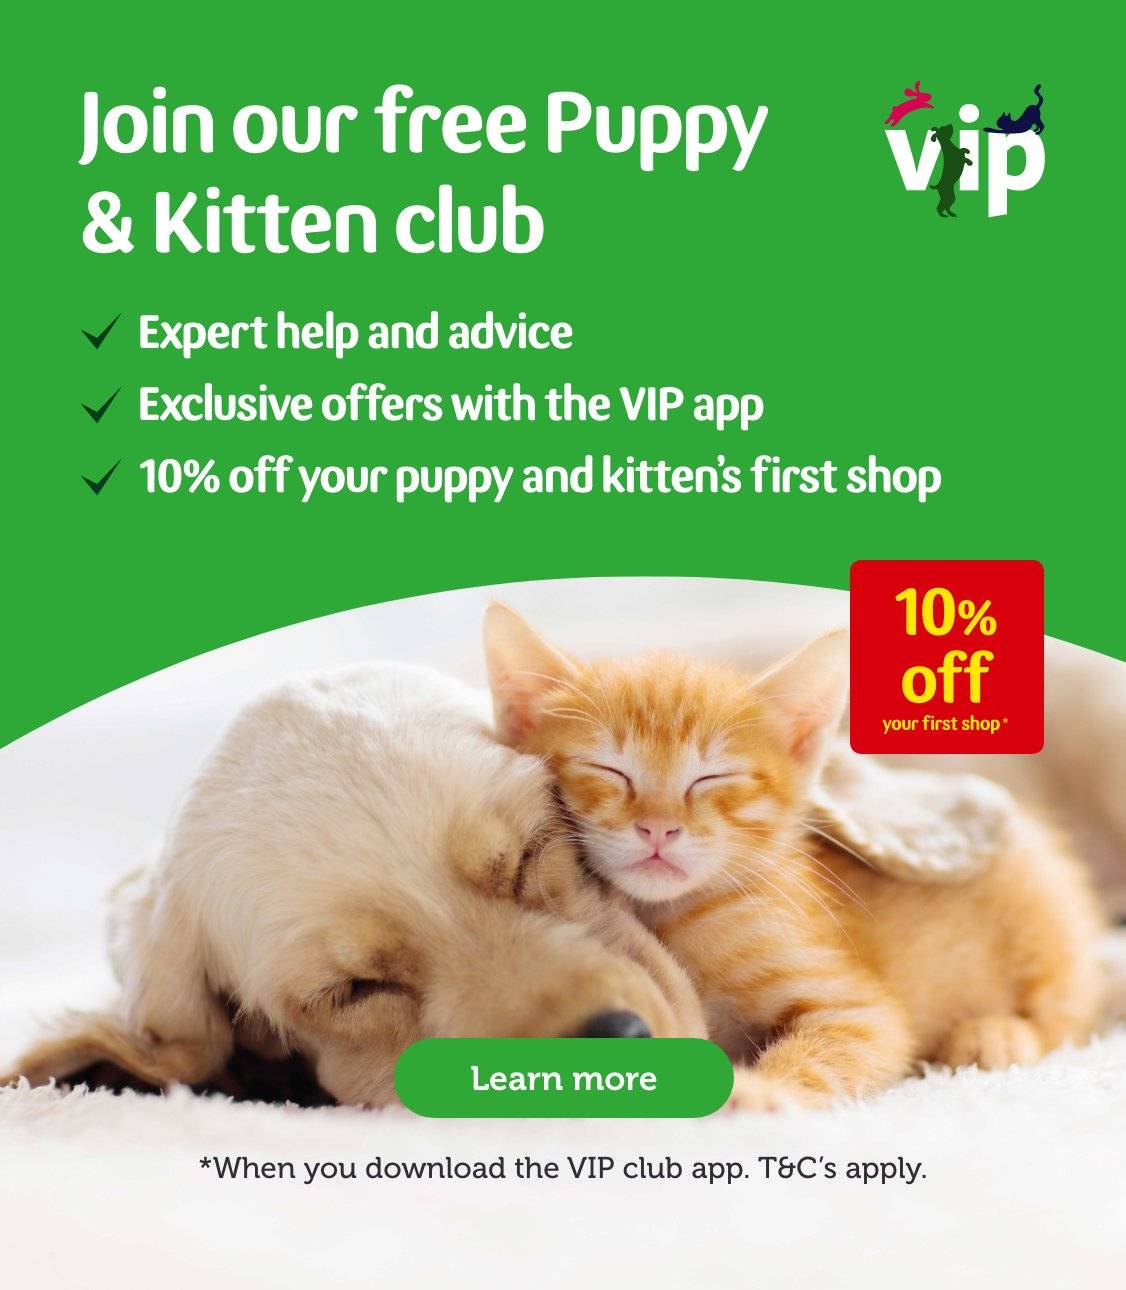 pets at home cat claw clipping